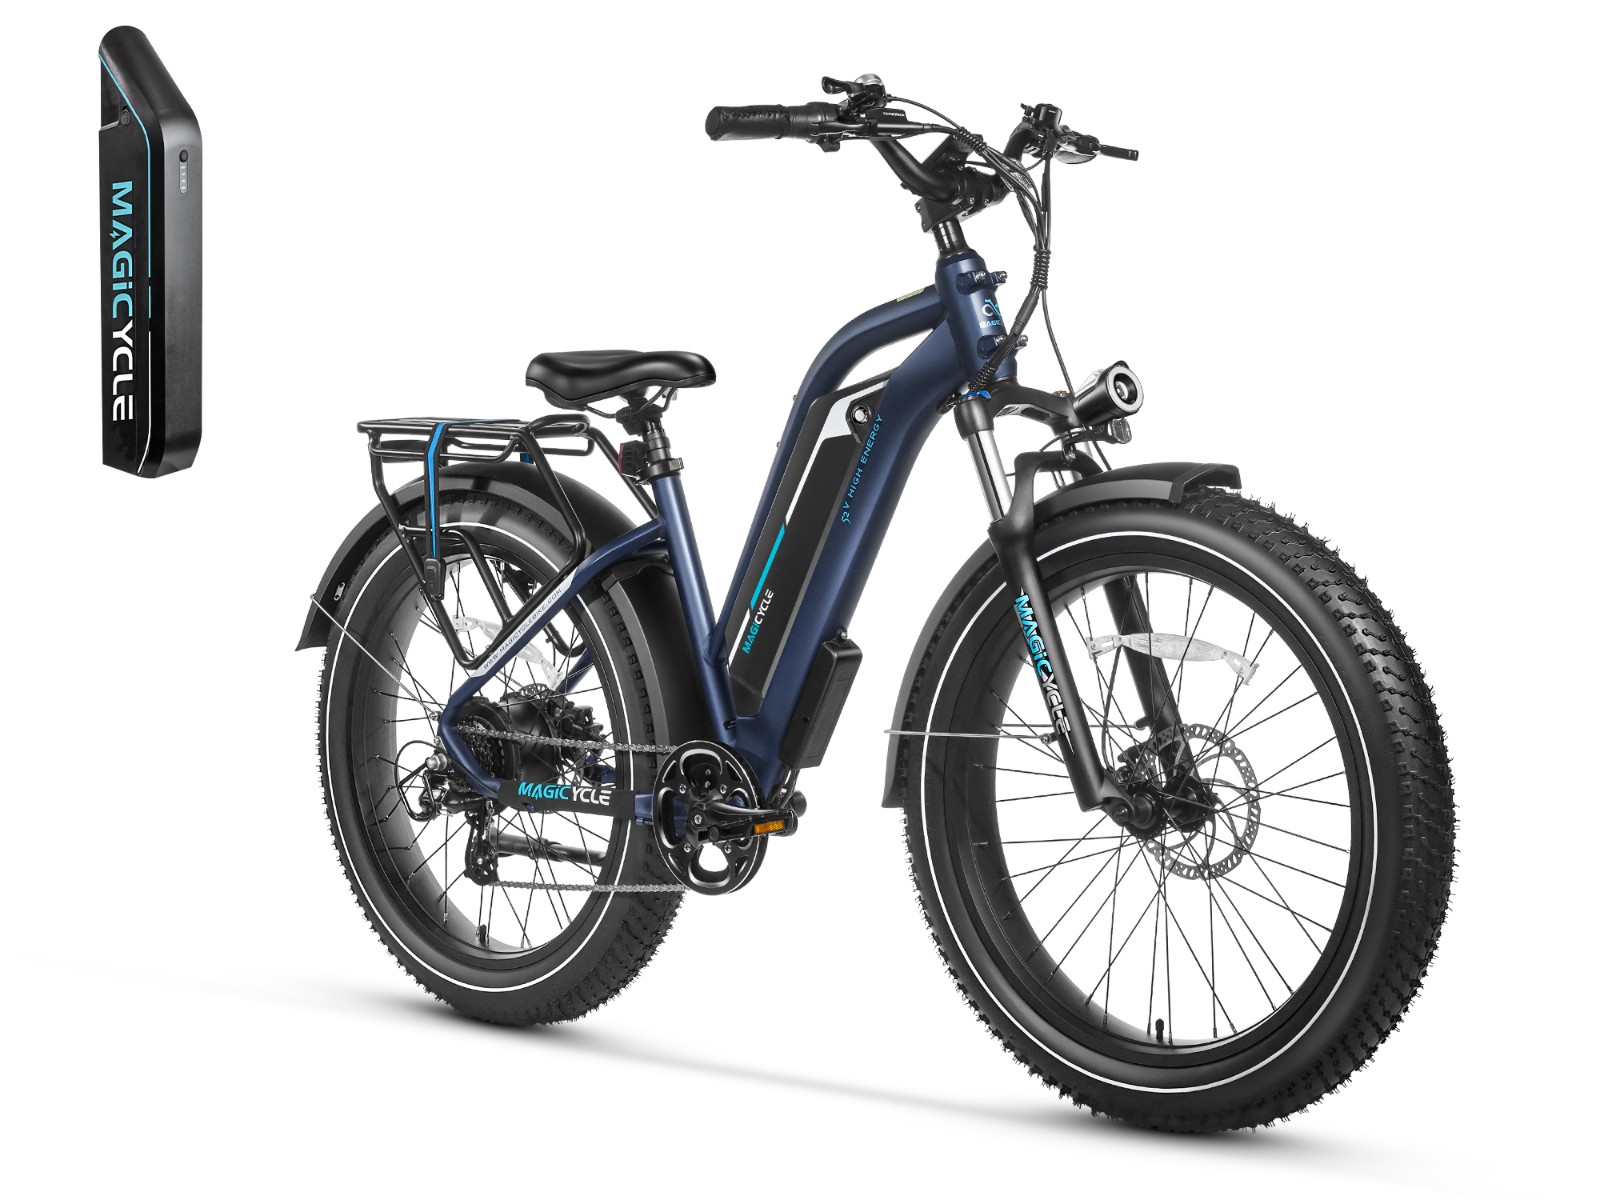 Combo Sale - Magicycle Cruiser Pro Step-thru 20Ah Ebike with Second 52V 15Ah Battery - Canada Only